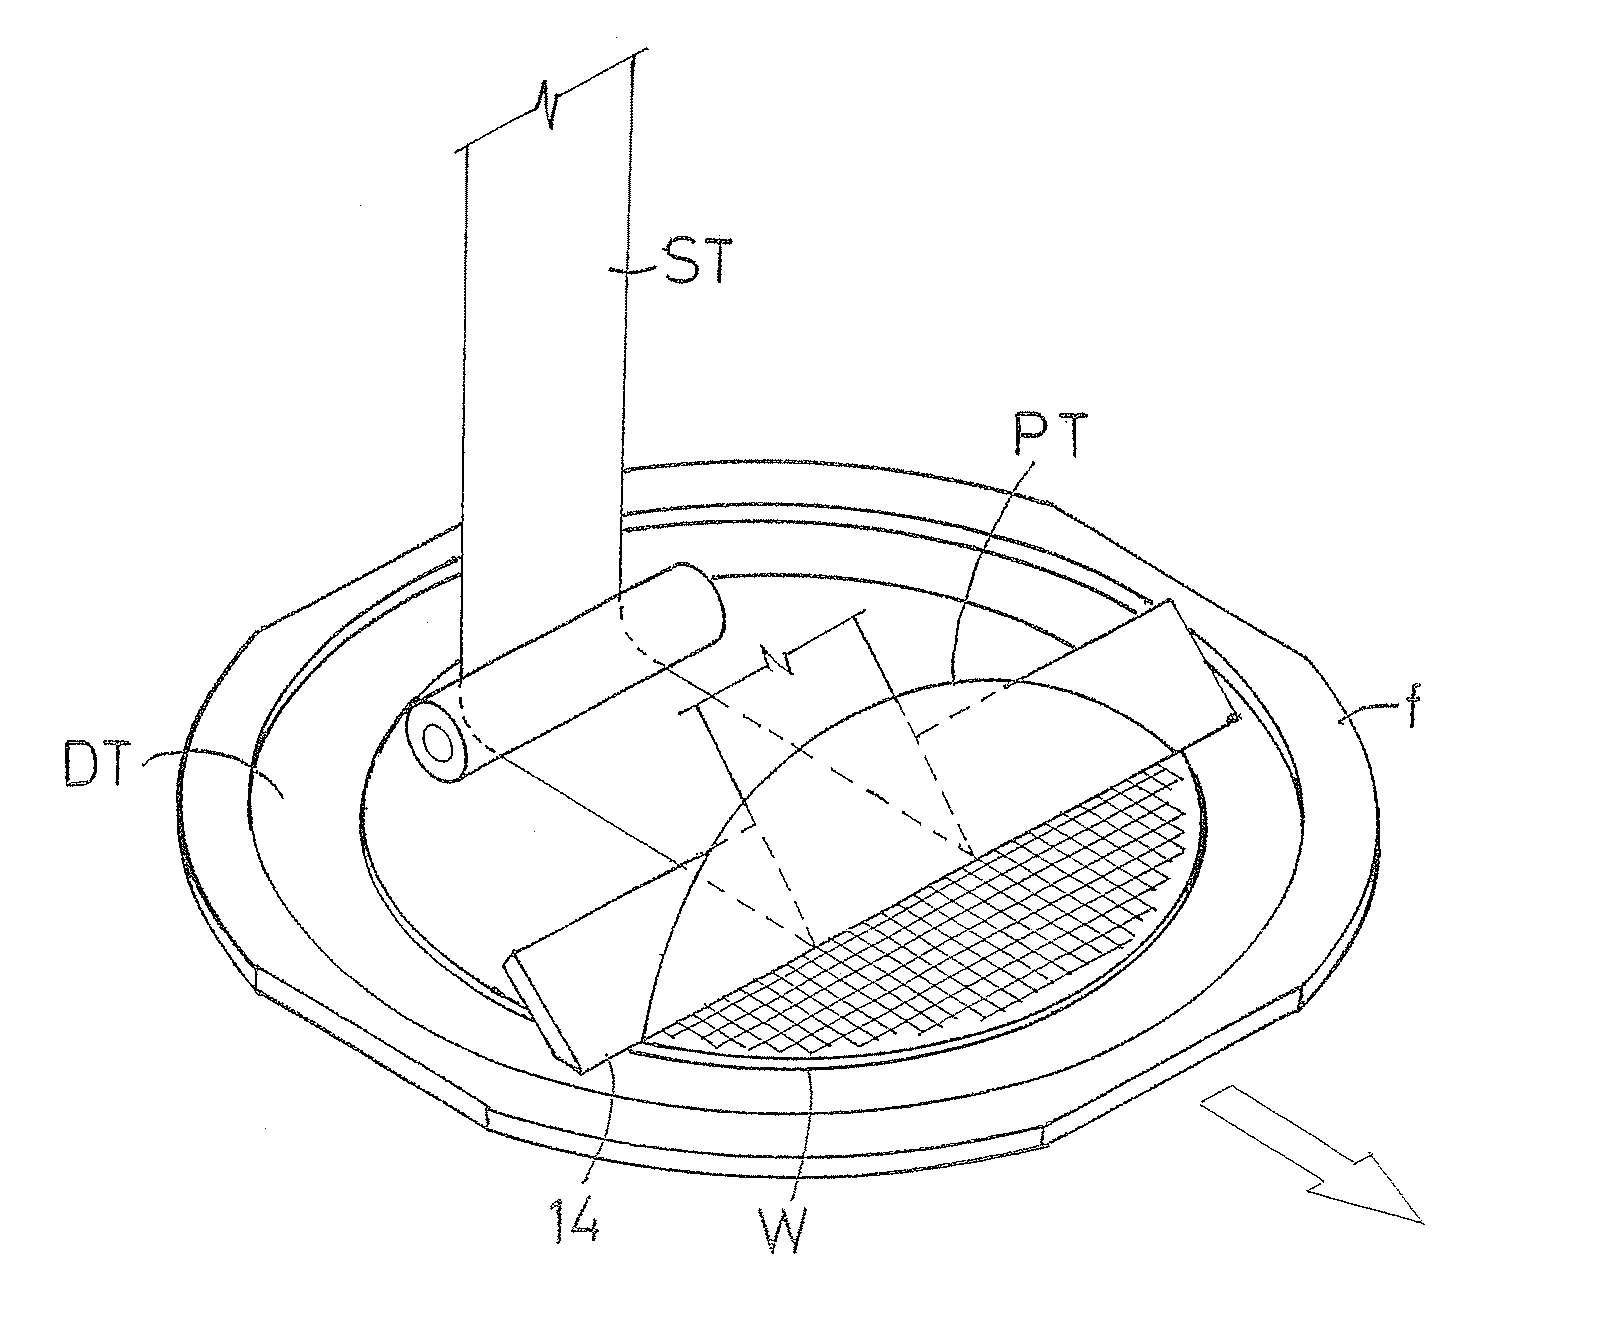 Method for joining adhesive tape to semiconductor wafer and method for separating protective tape from semiconductor wafer